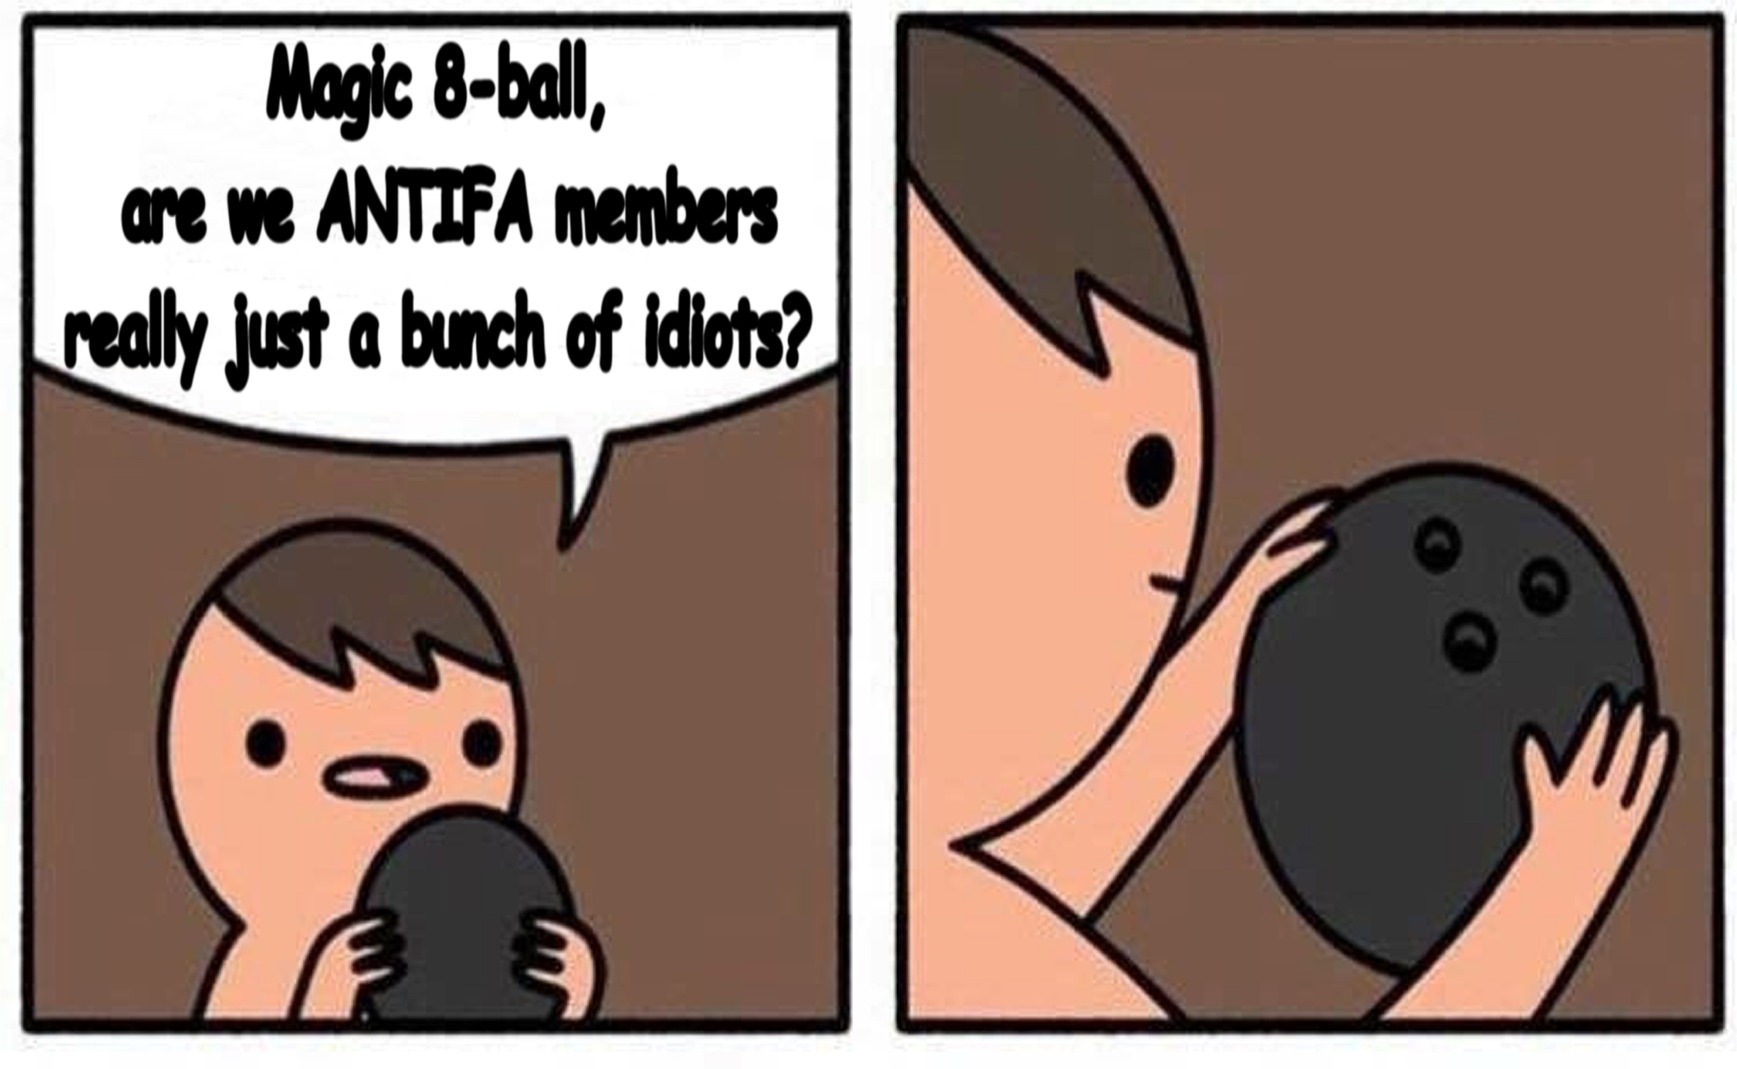 am stupid meme - Magic 8ball, are we Antifa members really just a bunch of idiots?